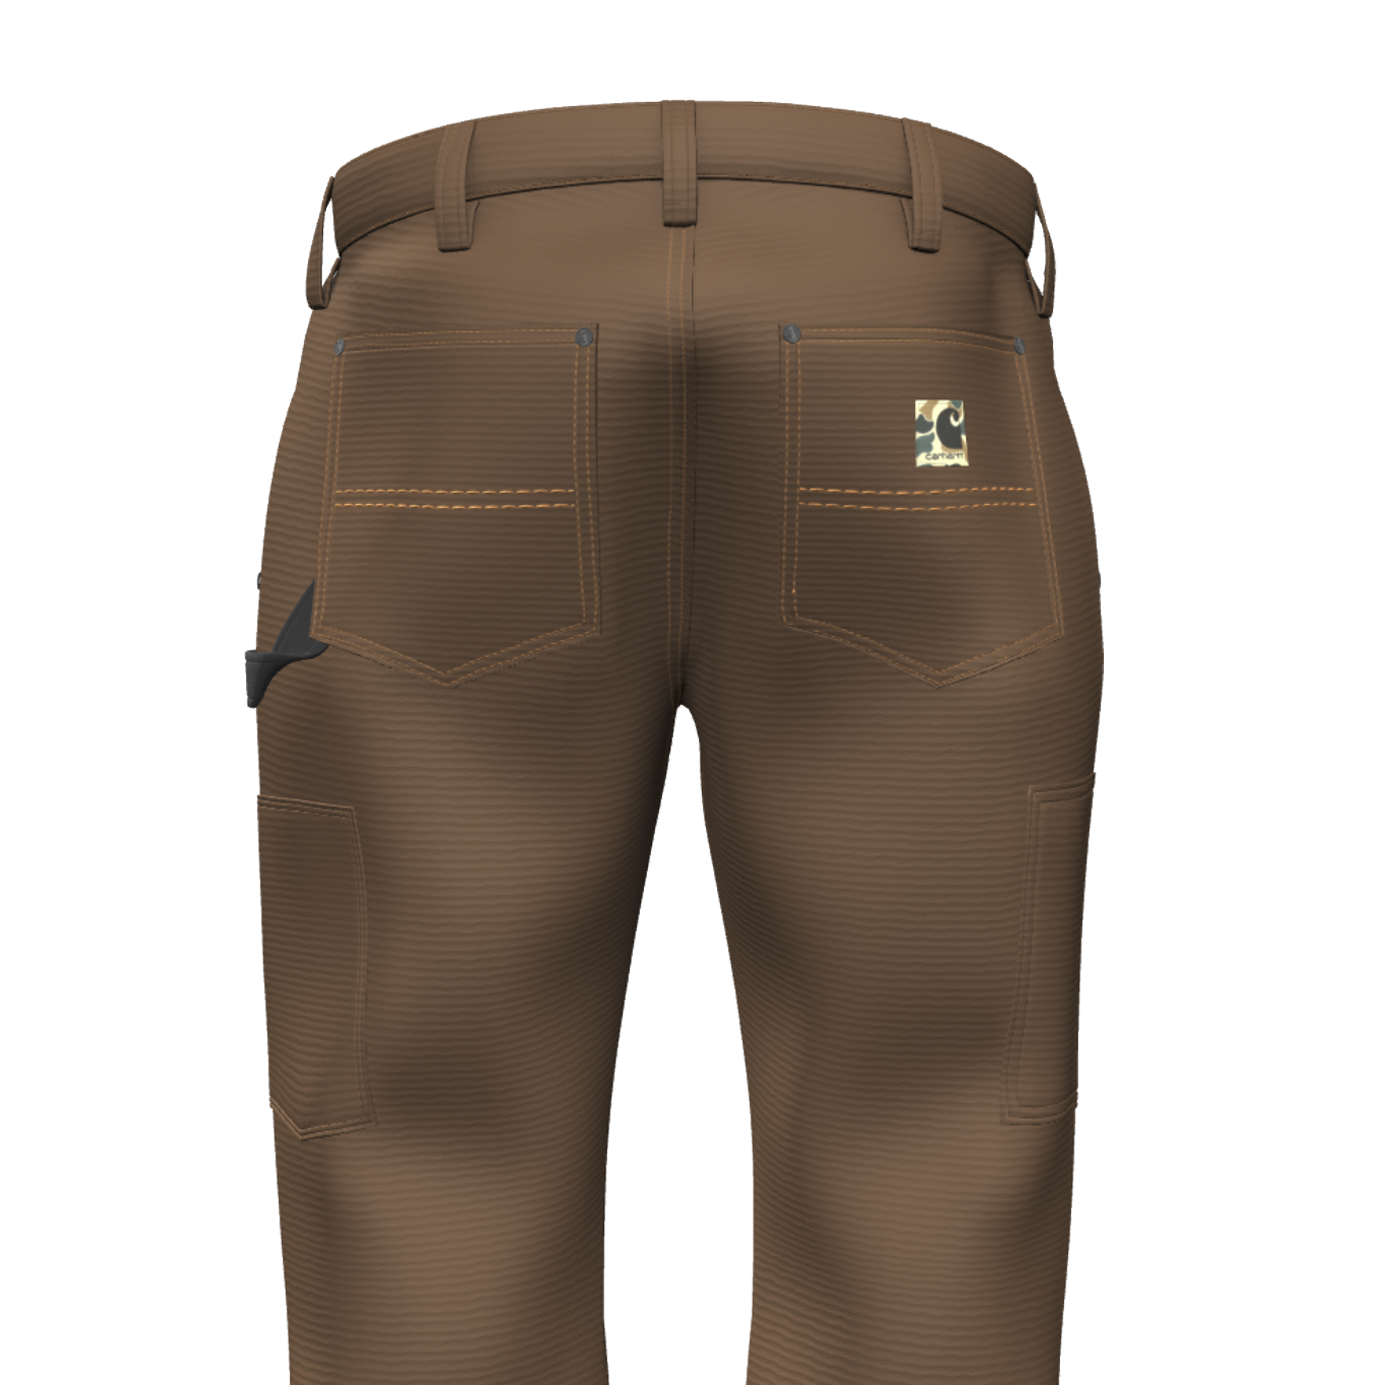 Men's Heritage Custom Work pant - Made in the USA of Imported Parts